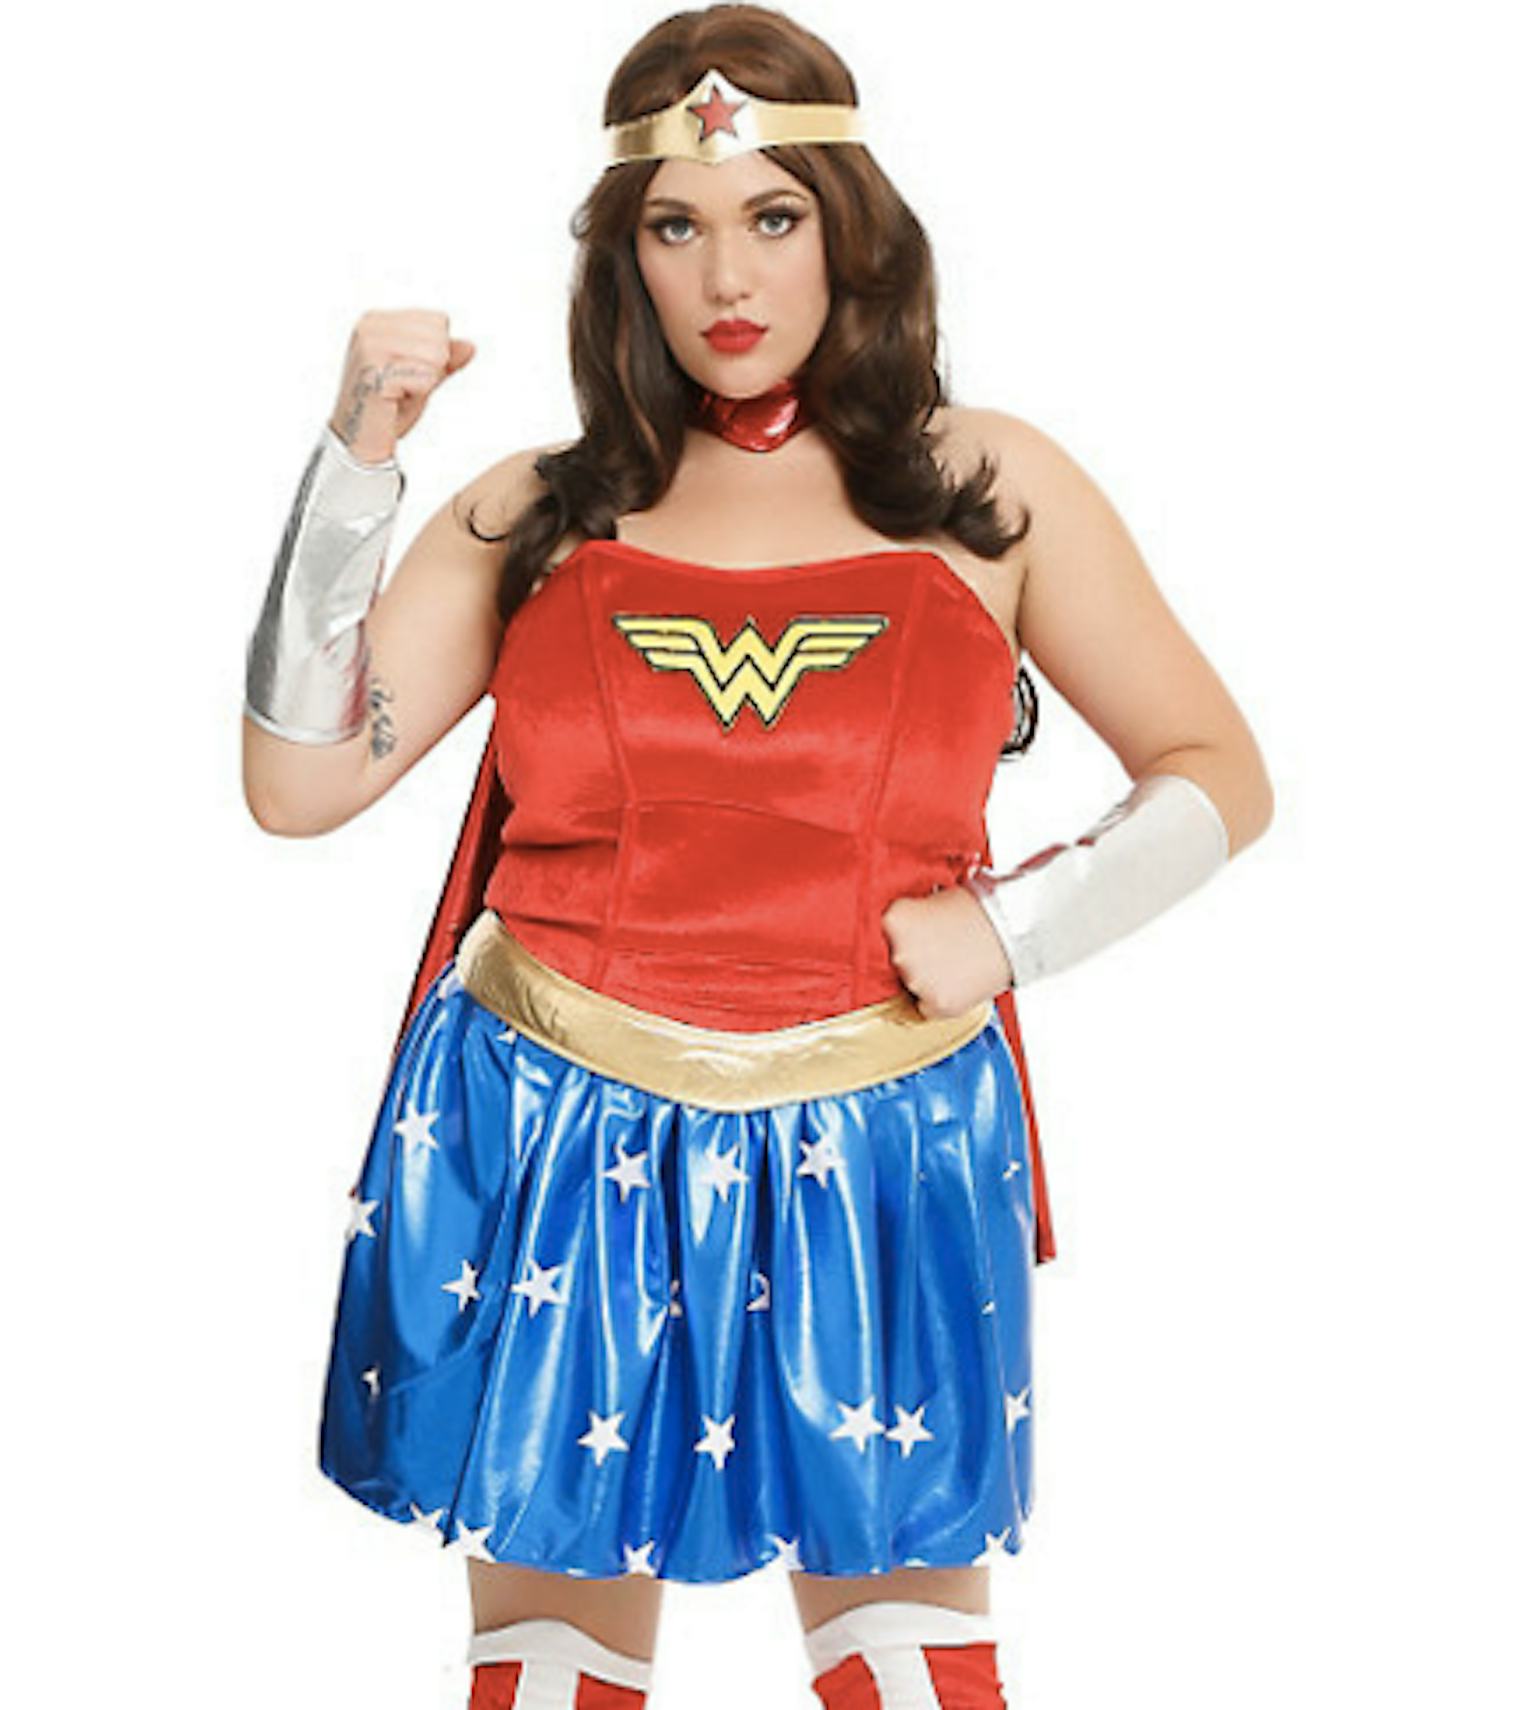 9 Lady Superhero Costumes For Halloween 2015, So You Can Save This ...